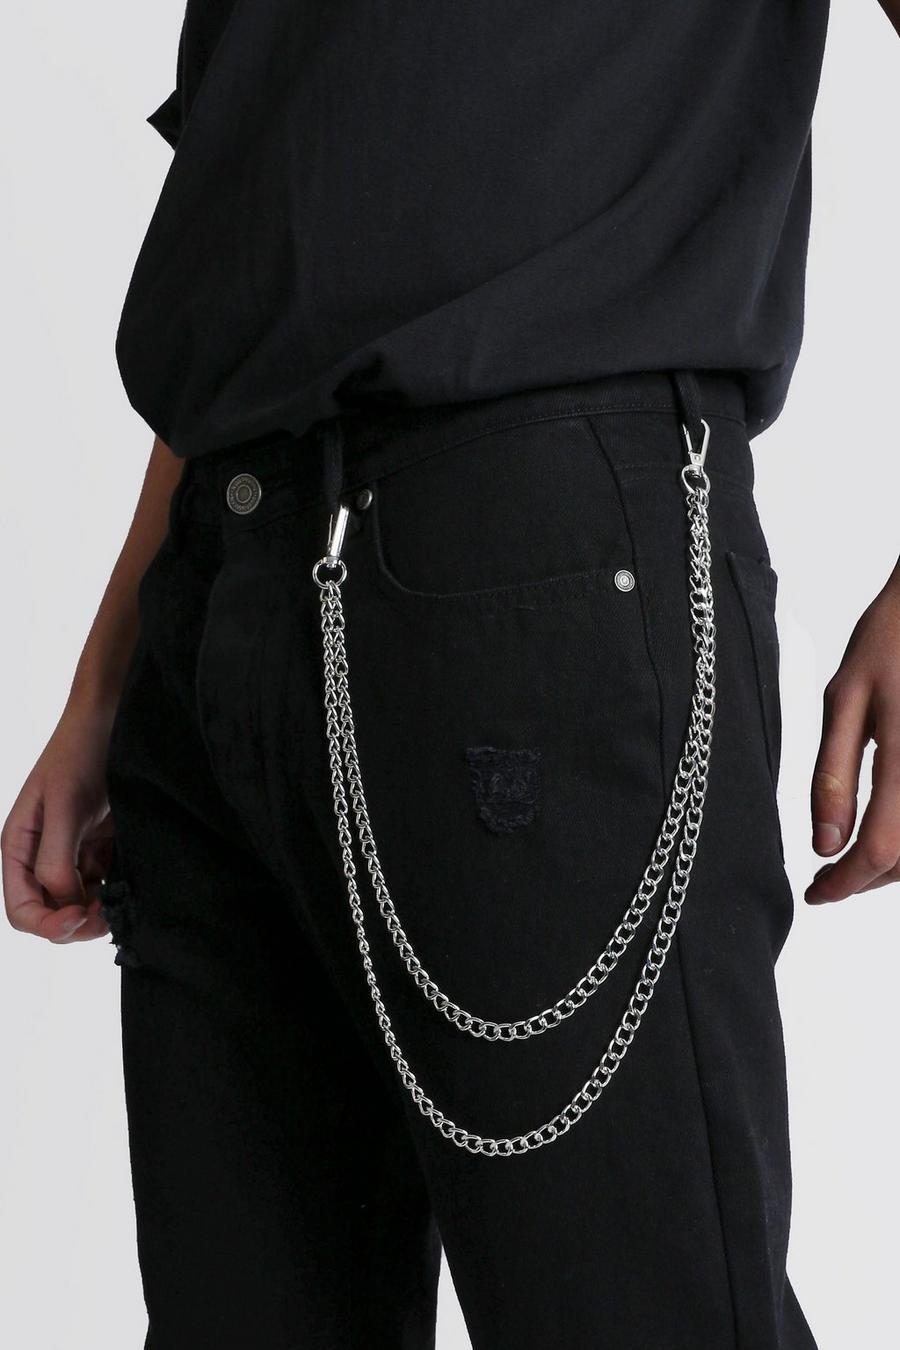 Jeans And Chains | lupon.gov.ph